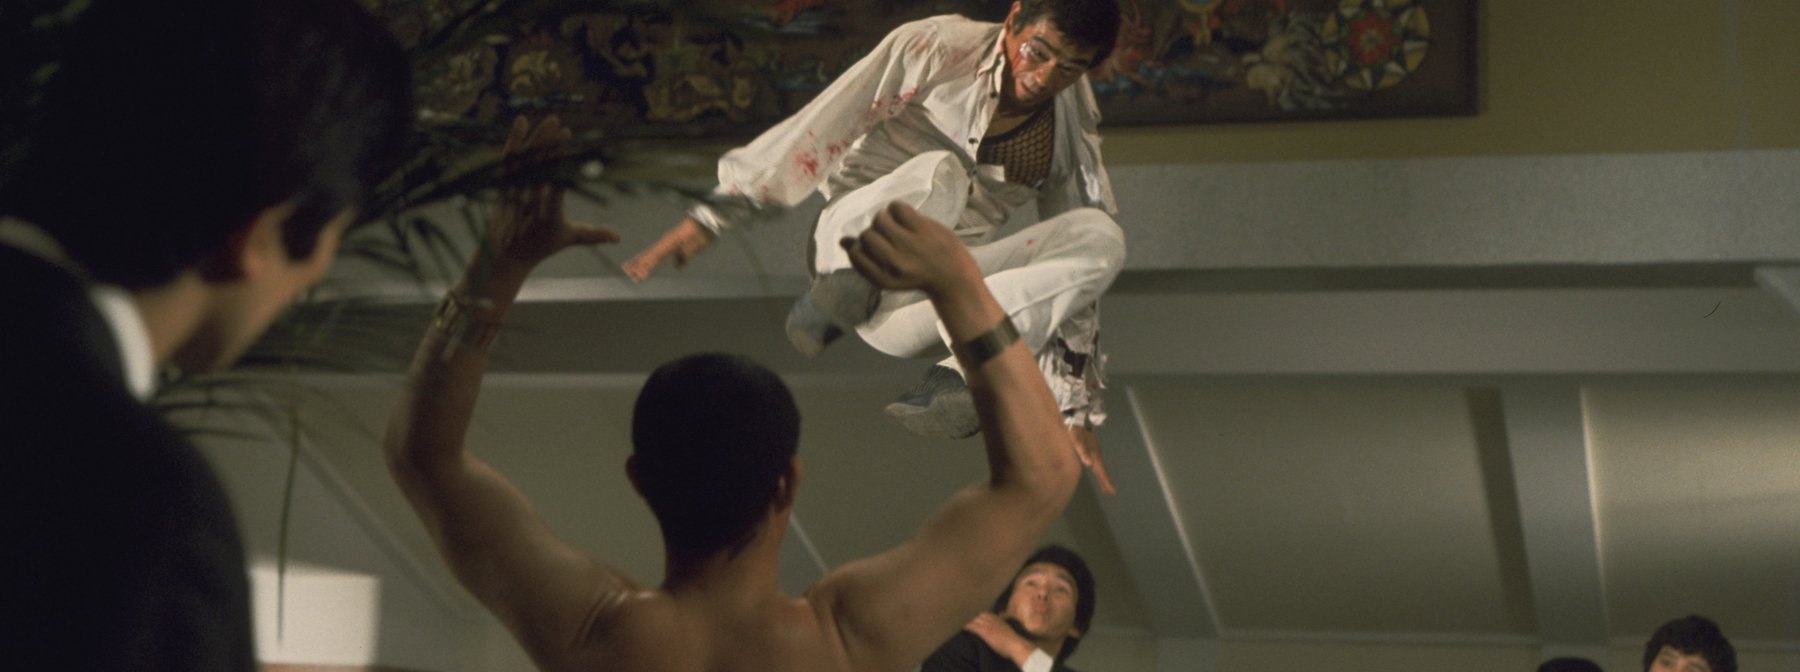 International Man of Action – The Many Faces of Sonny Chiba